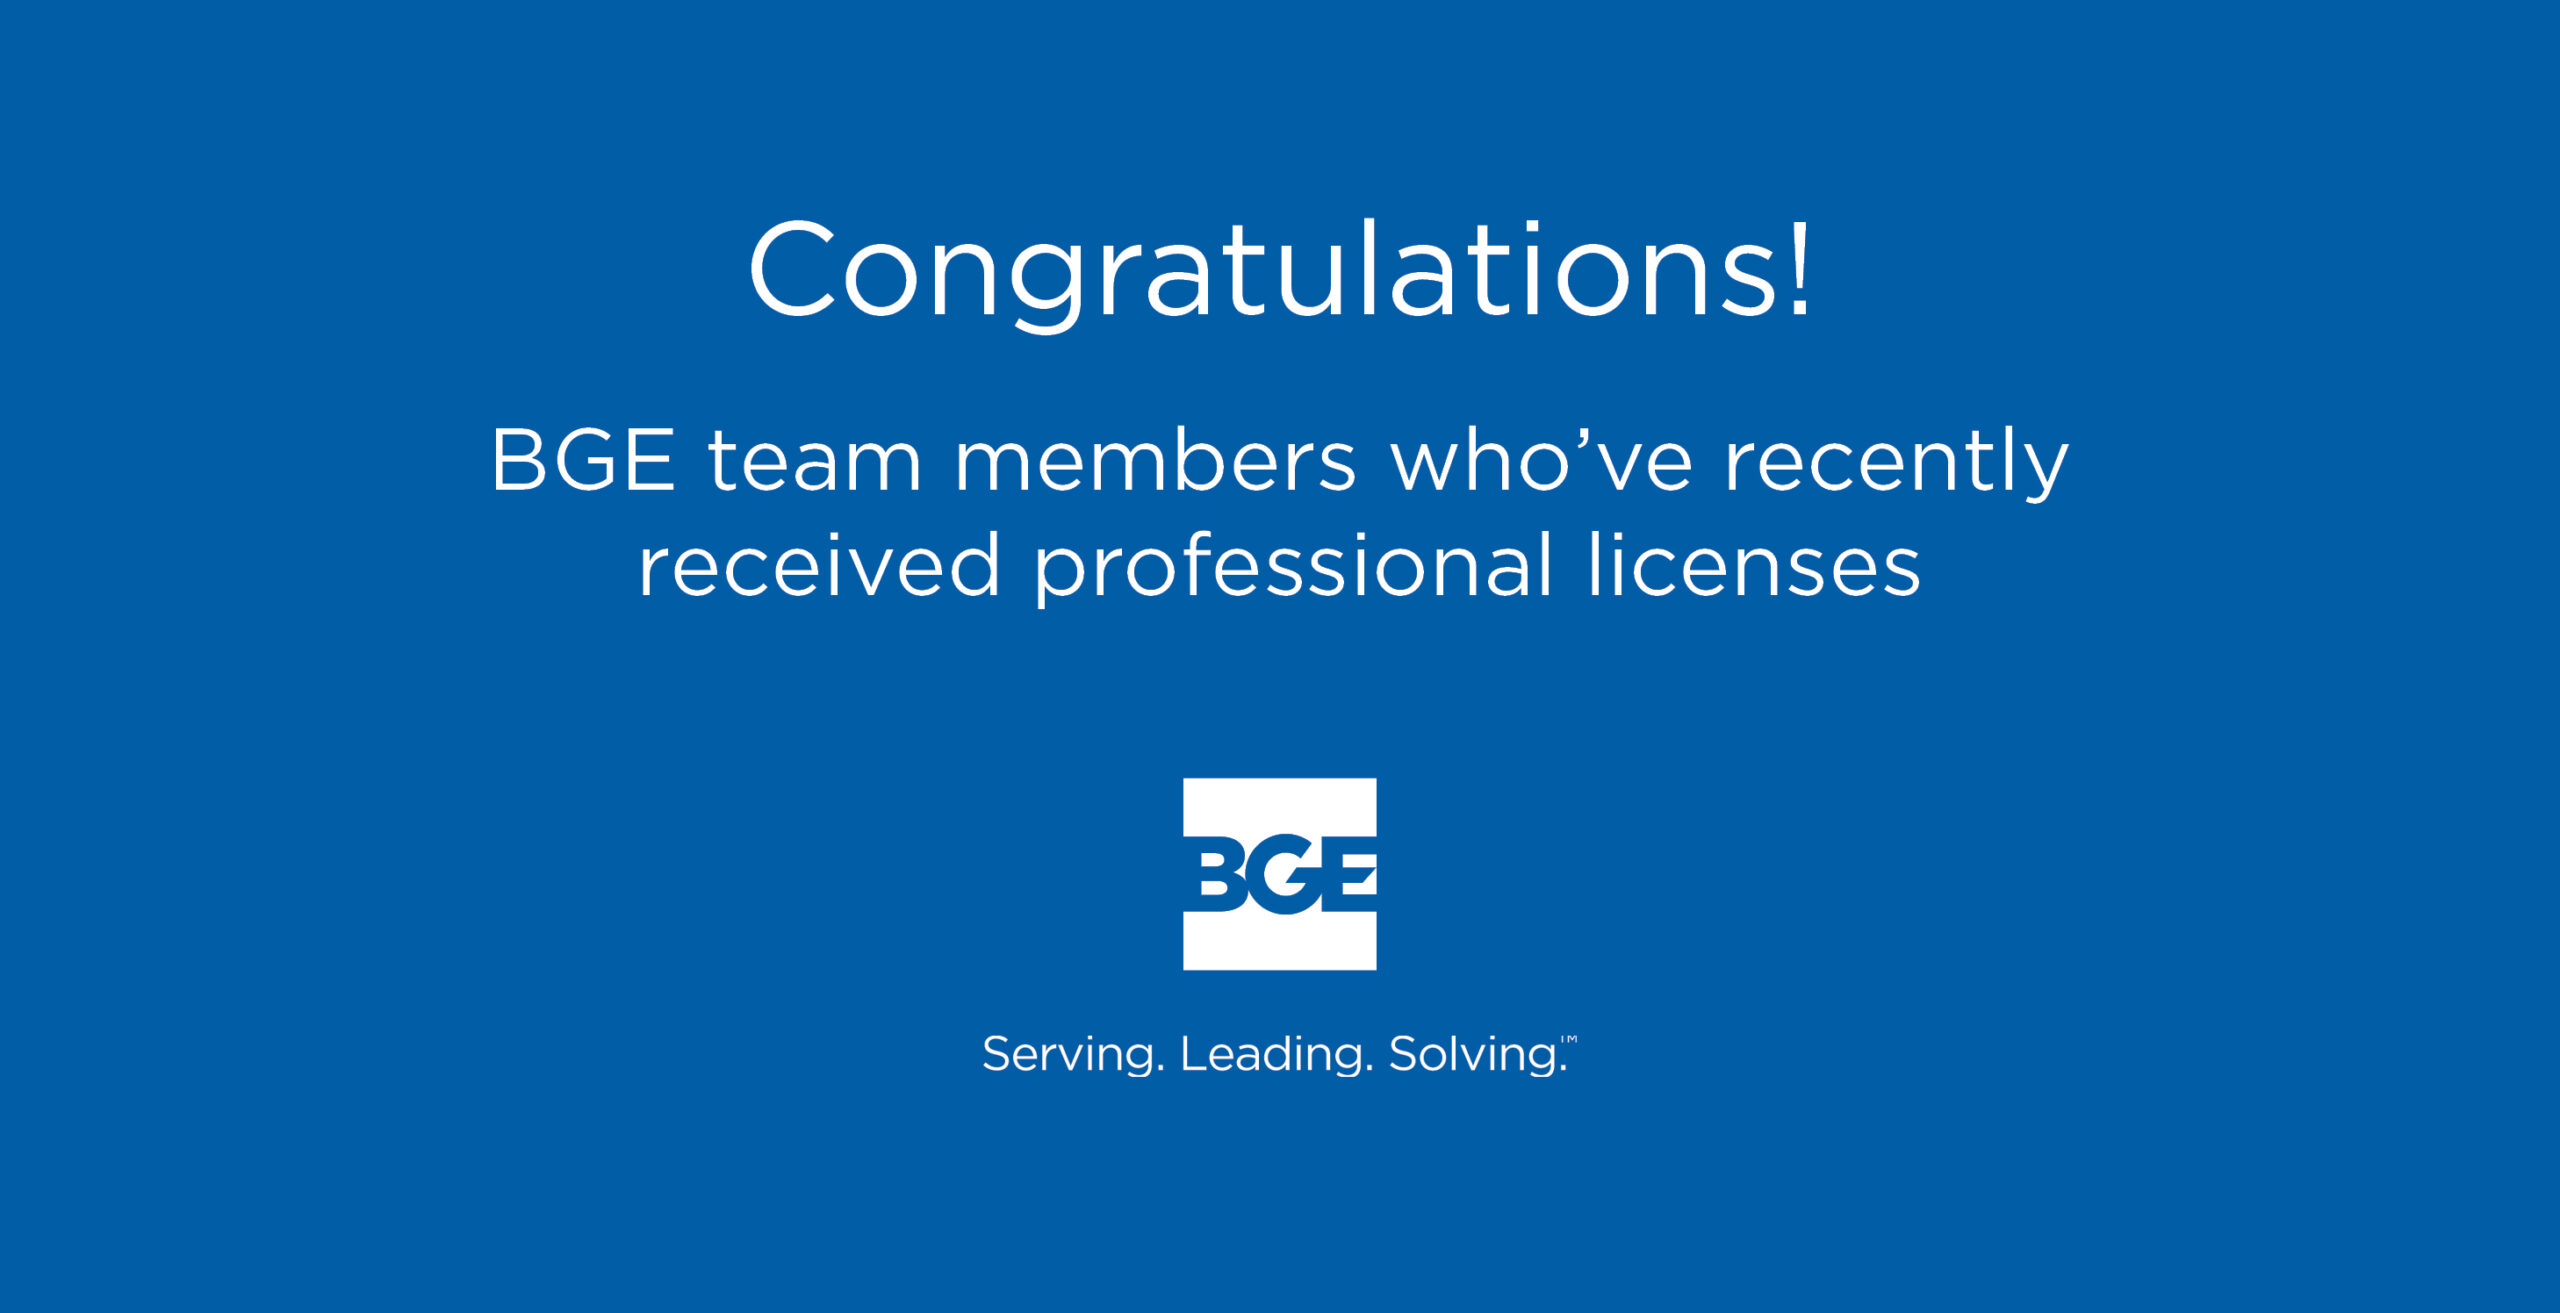 Congratulations graphic for BGE employees who received professional licenses